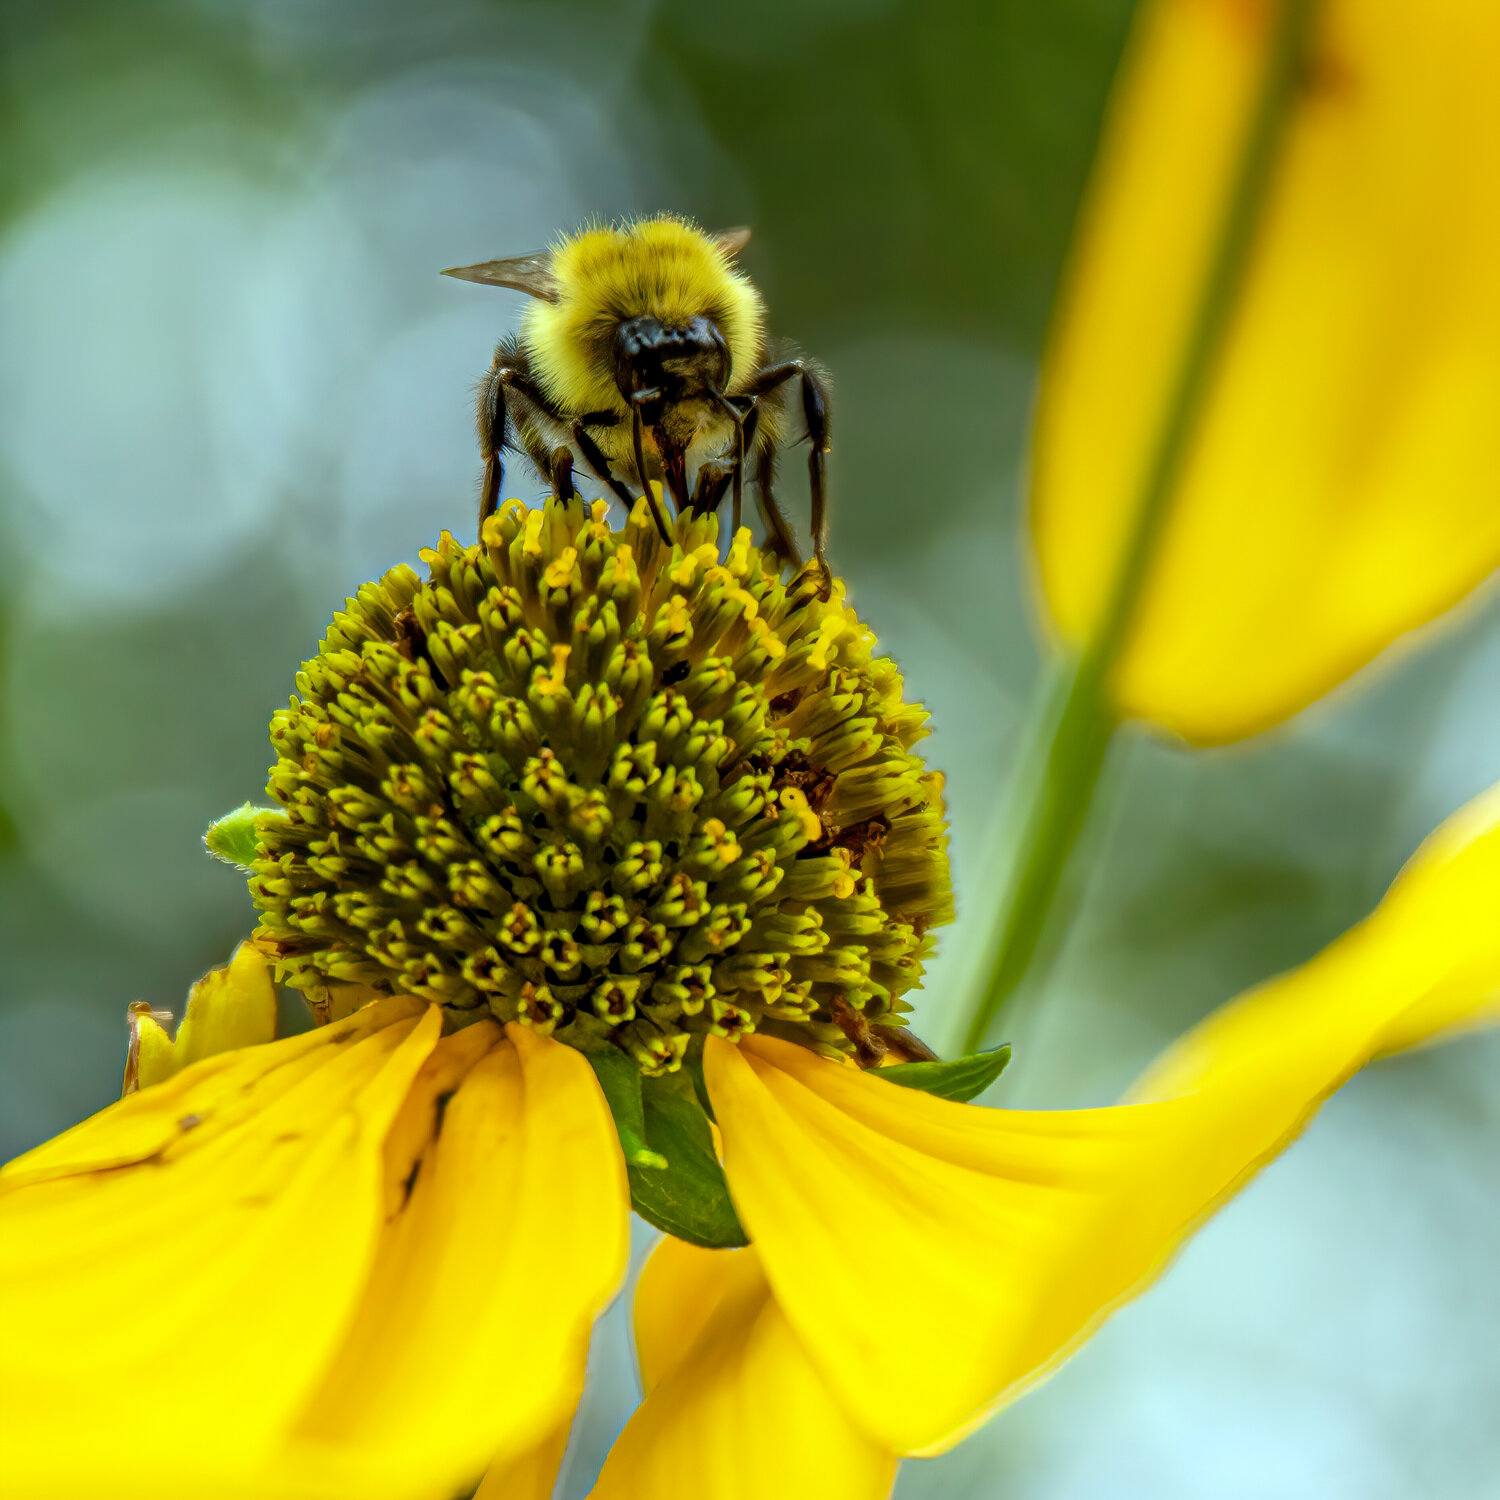 Bumblebee on yellow coneflower (Echinaecea paradoxa), a North American native species, in Ipswich (Courtesy of Carl Jappe)